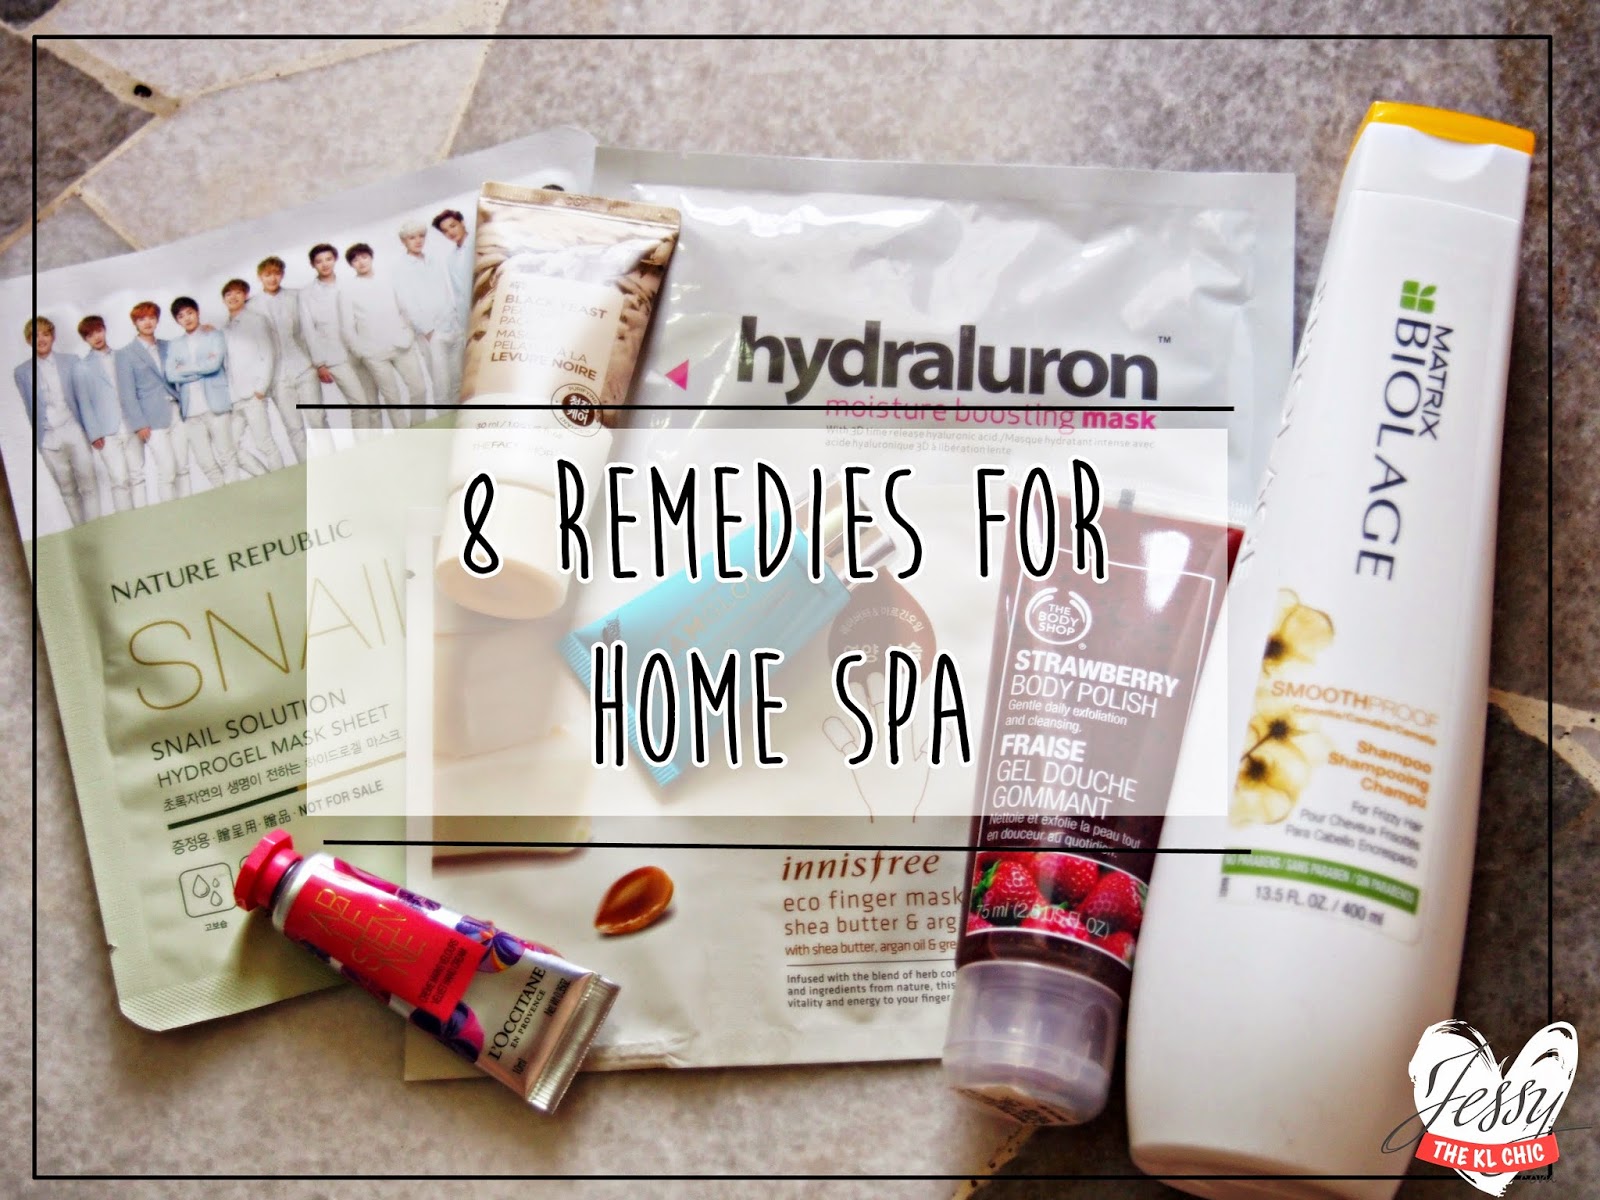 Beauty: 8 Remedies For Home Spa